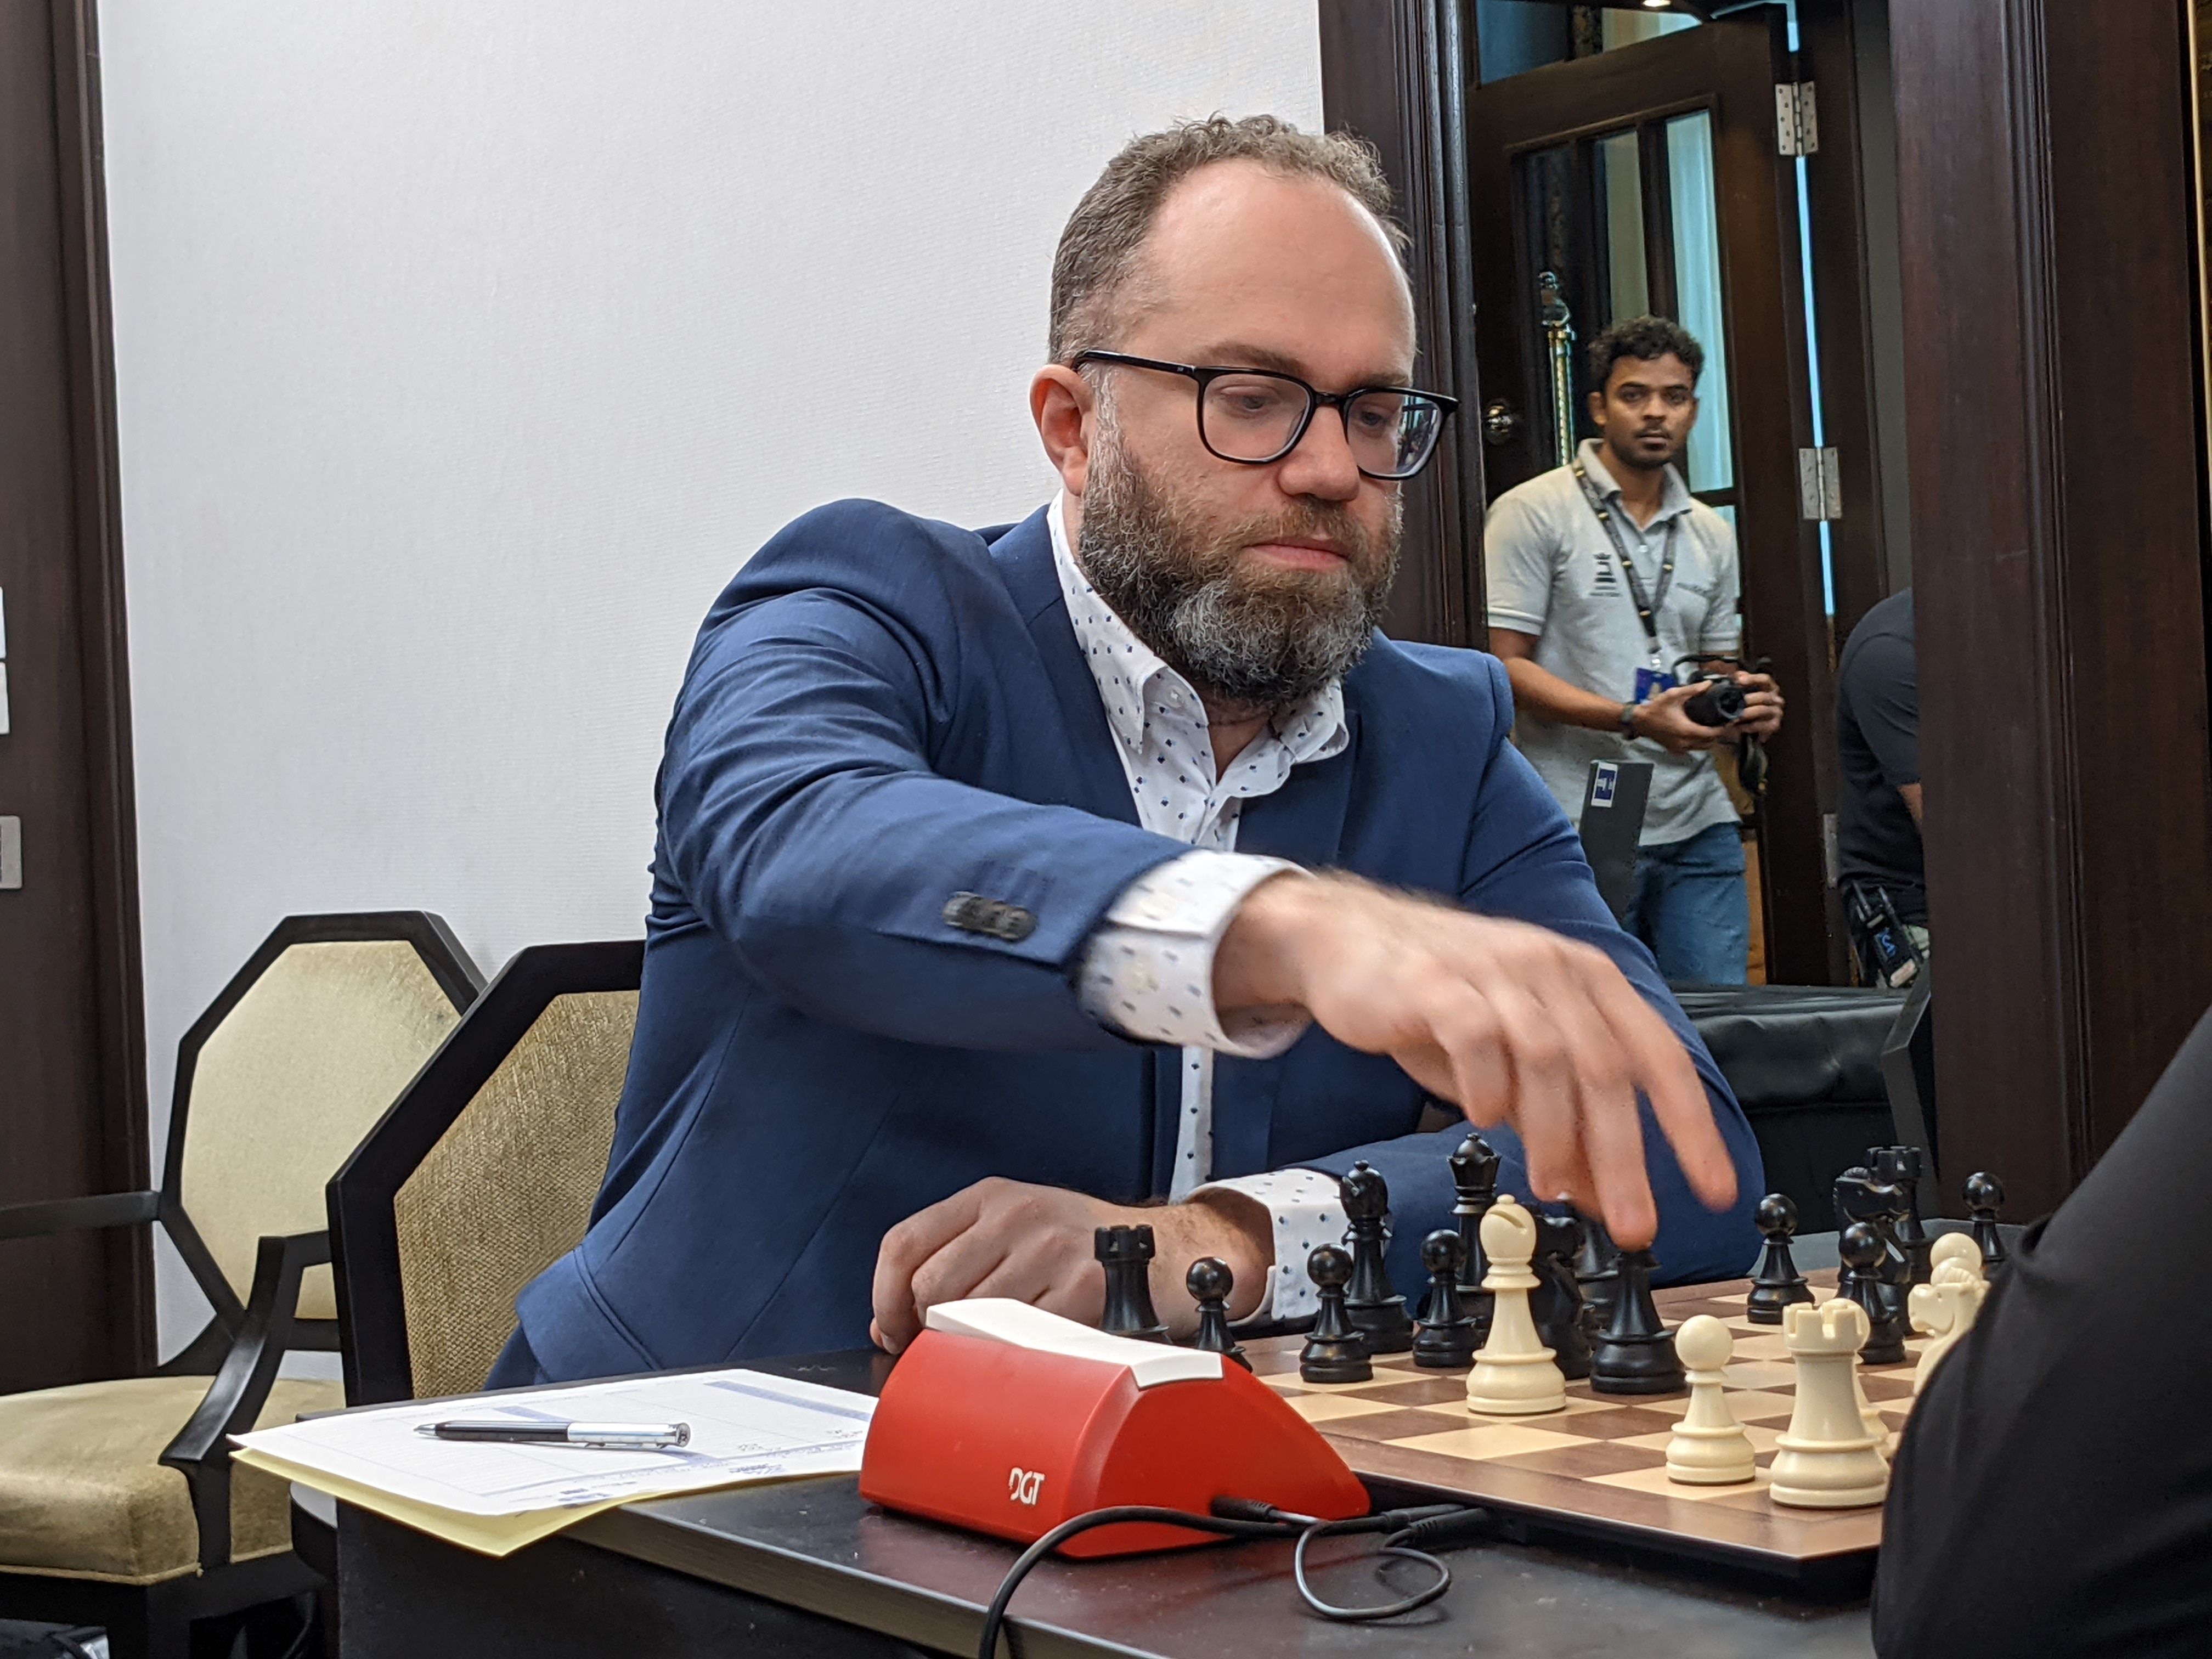 The WR Chess Masters 2023 starts on Wednesday